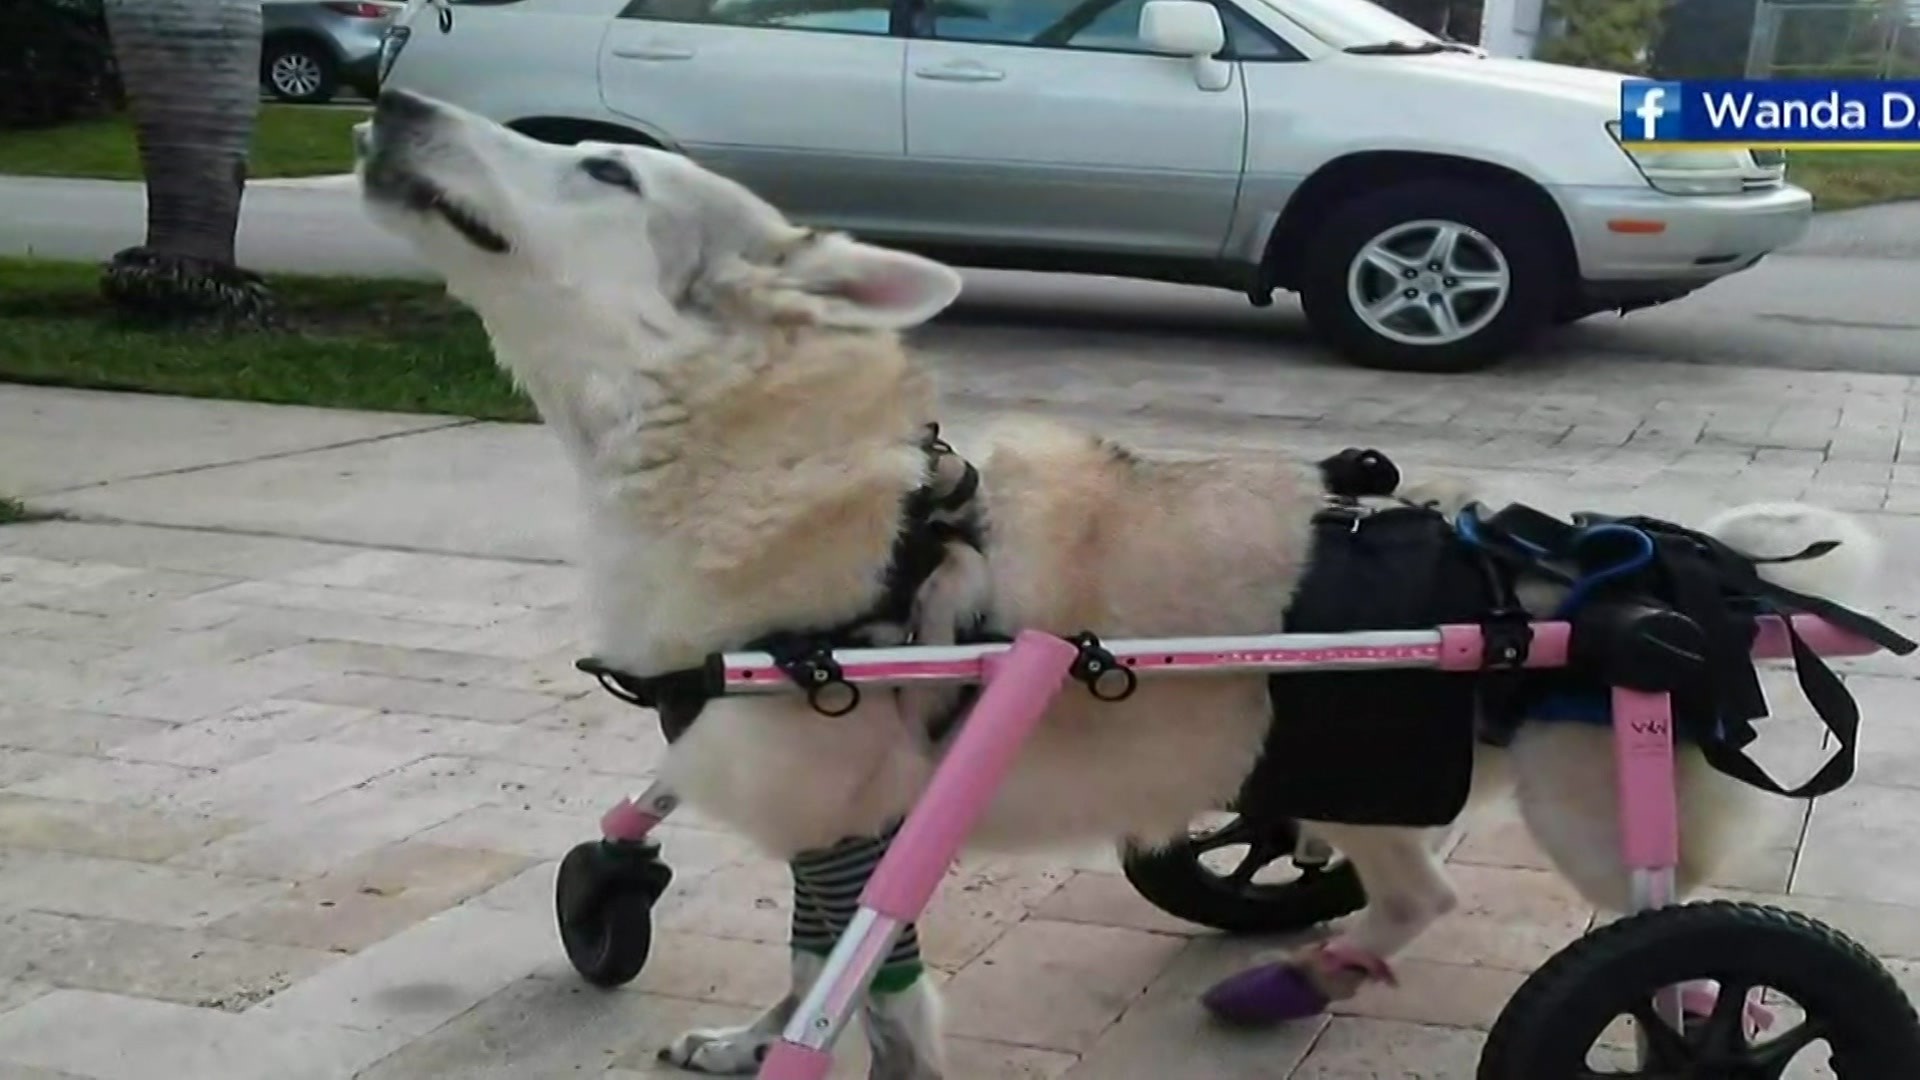 Wanda Ferrari is desperate and despondent.... frantic to know what's become of her disabled dog, Zorra. Zorra was inside a car that was stolen in Oakland Park, Fla.